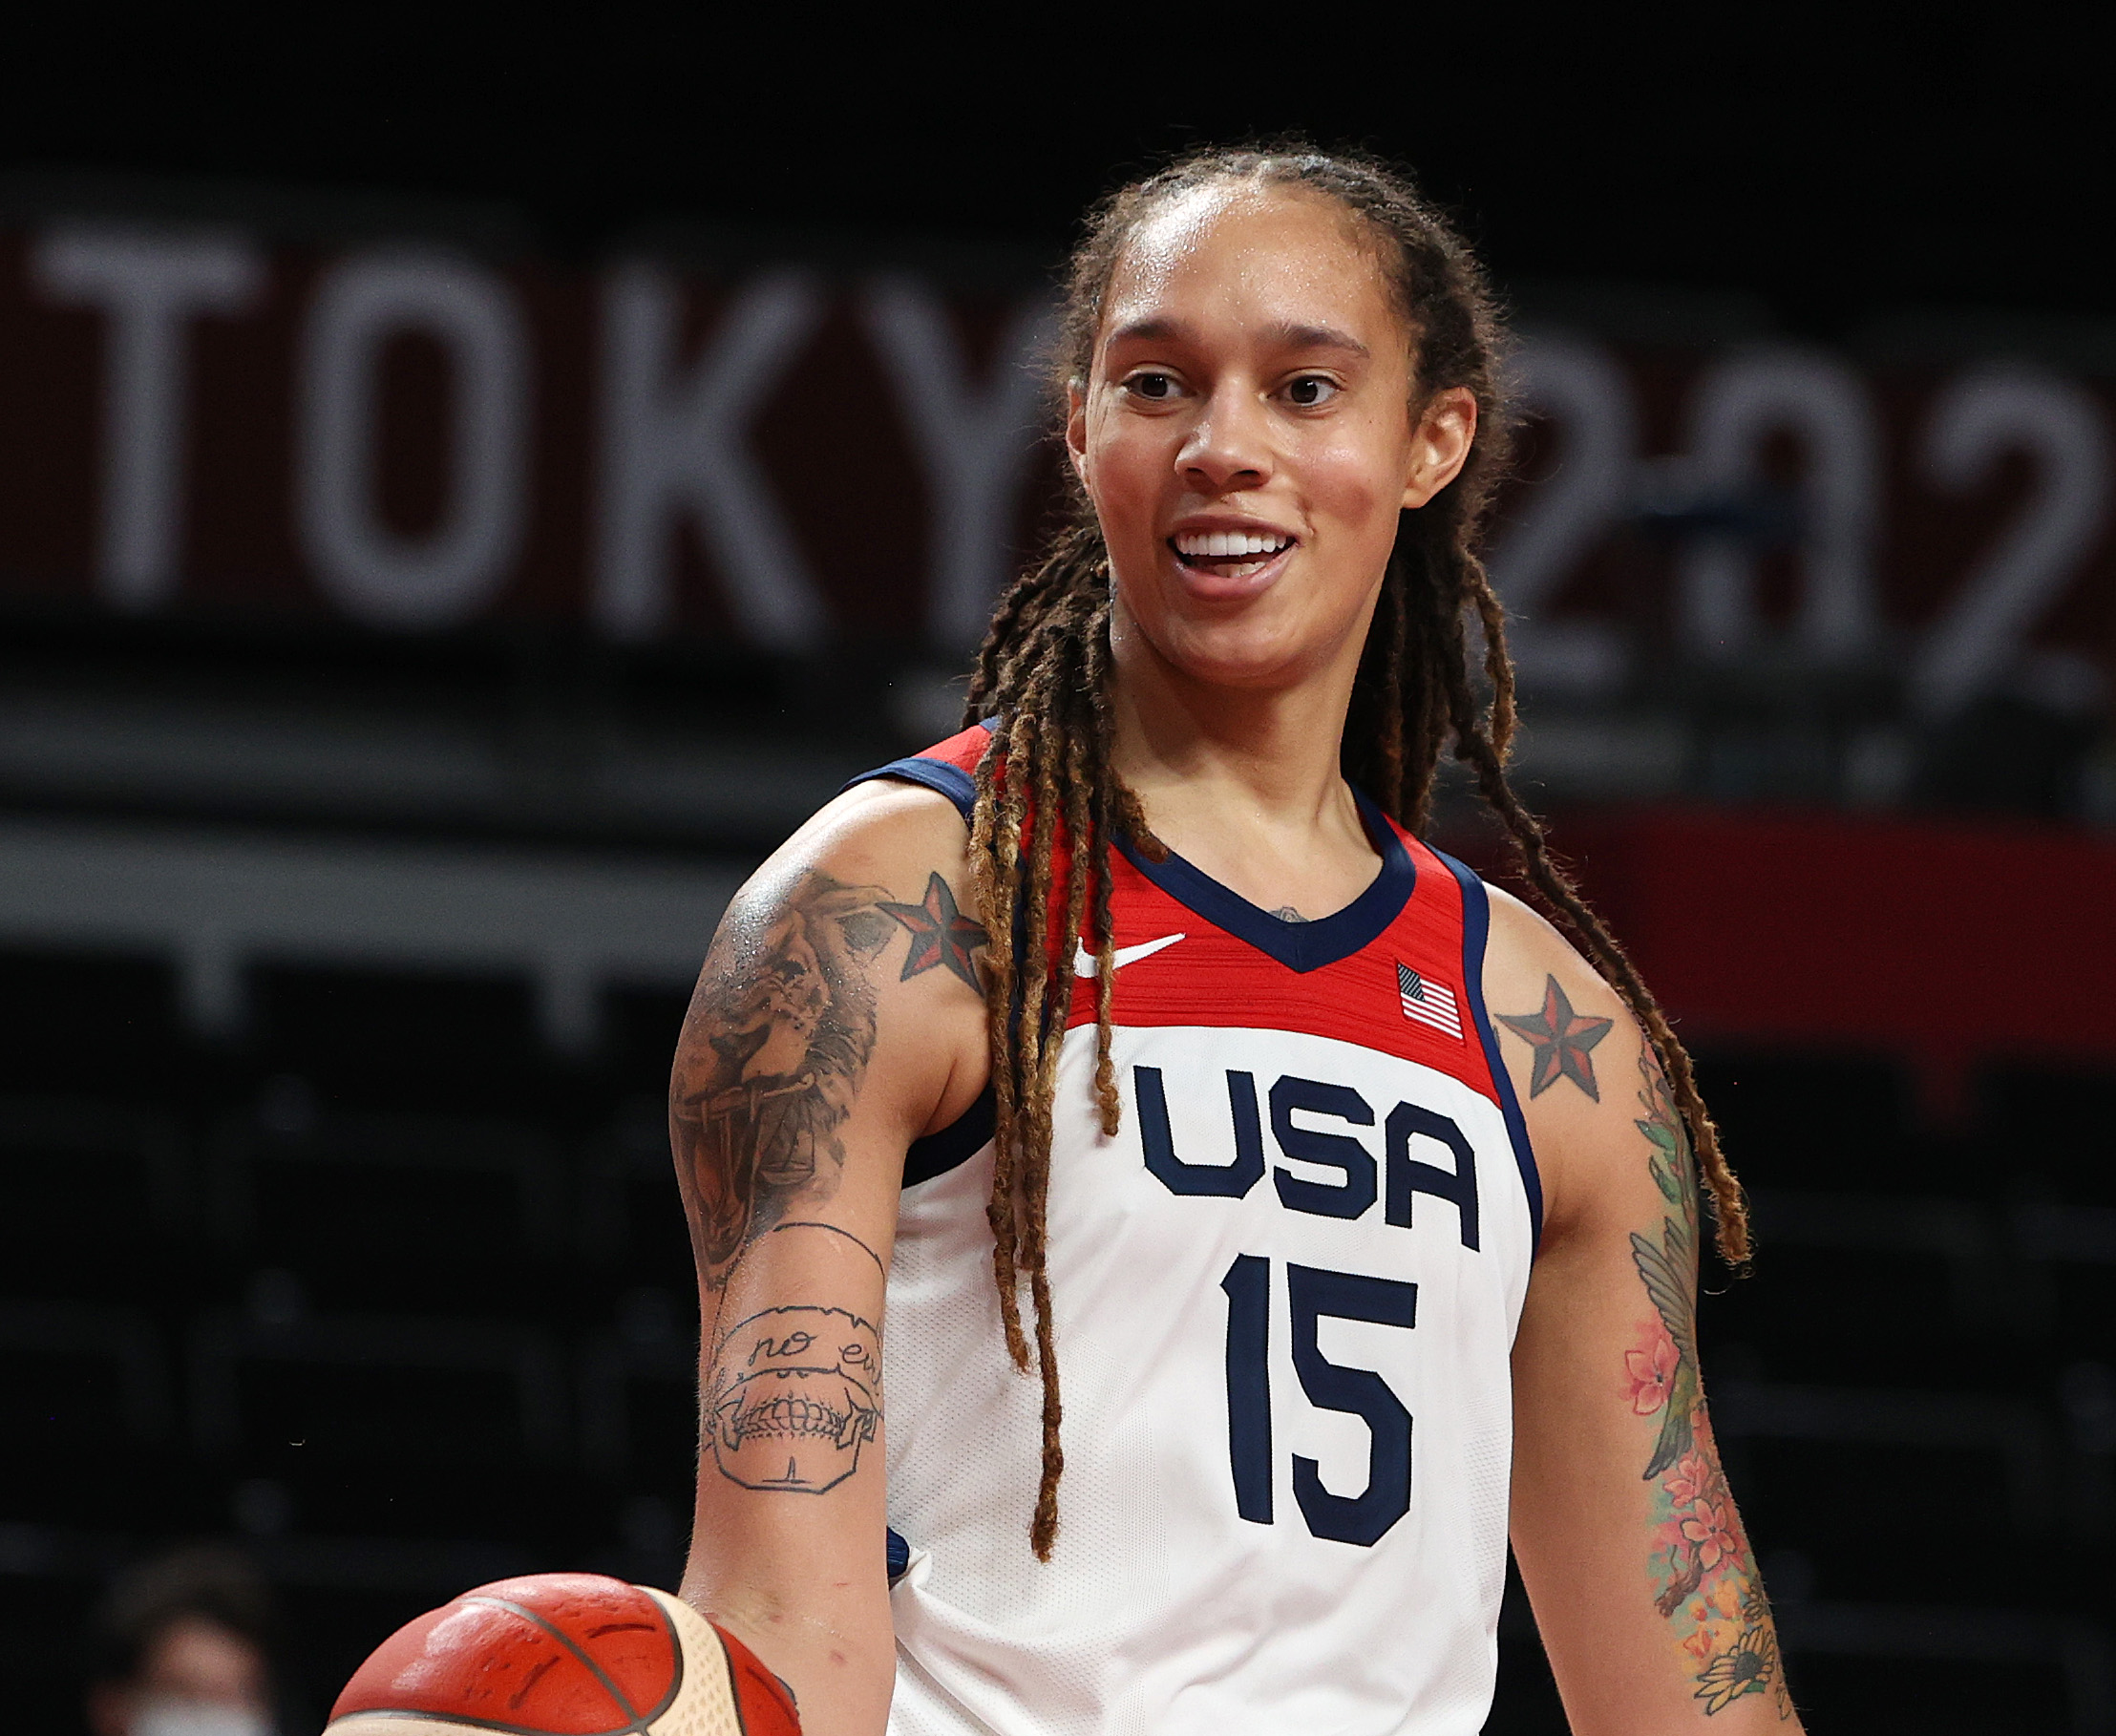 Brittney Griner  I think this is so live Im thinking a biomechanical  leg on me would be live as shit as well I just need some ink and this  will do 